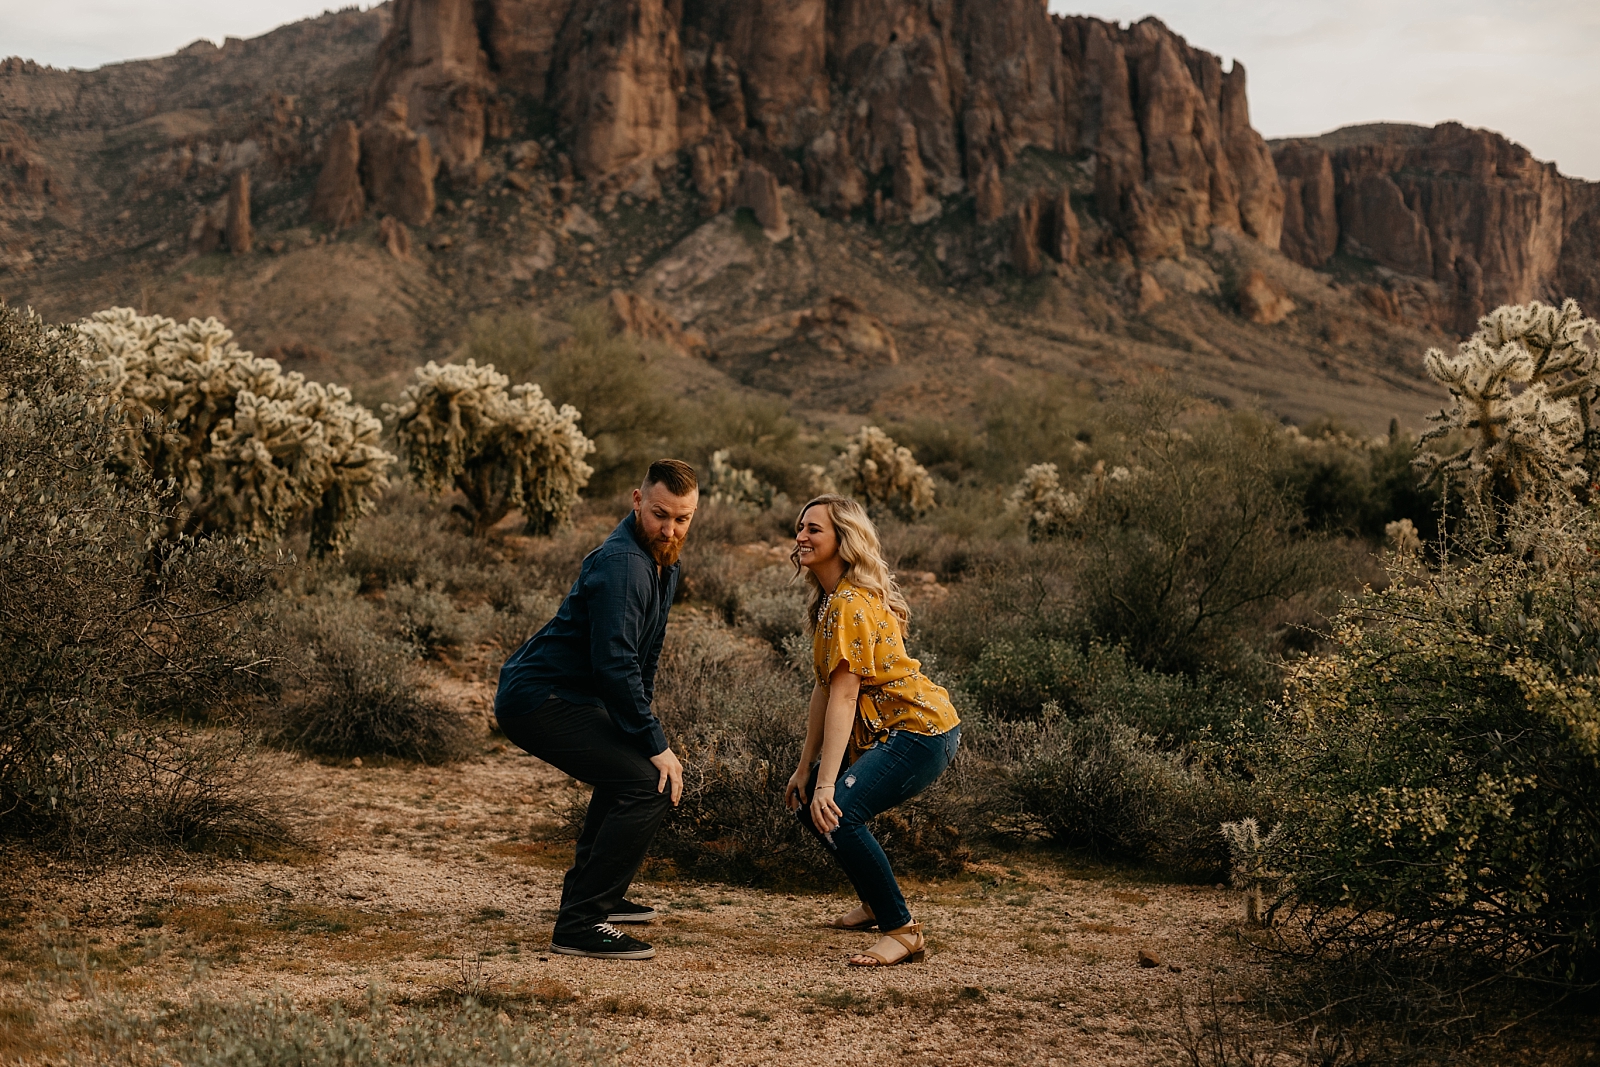 couple dancing and laughing fun tina twerk in the desert lost dutchman superstition mountain engagement photos apache junction az samantha patri photography